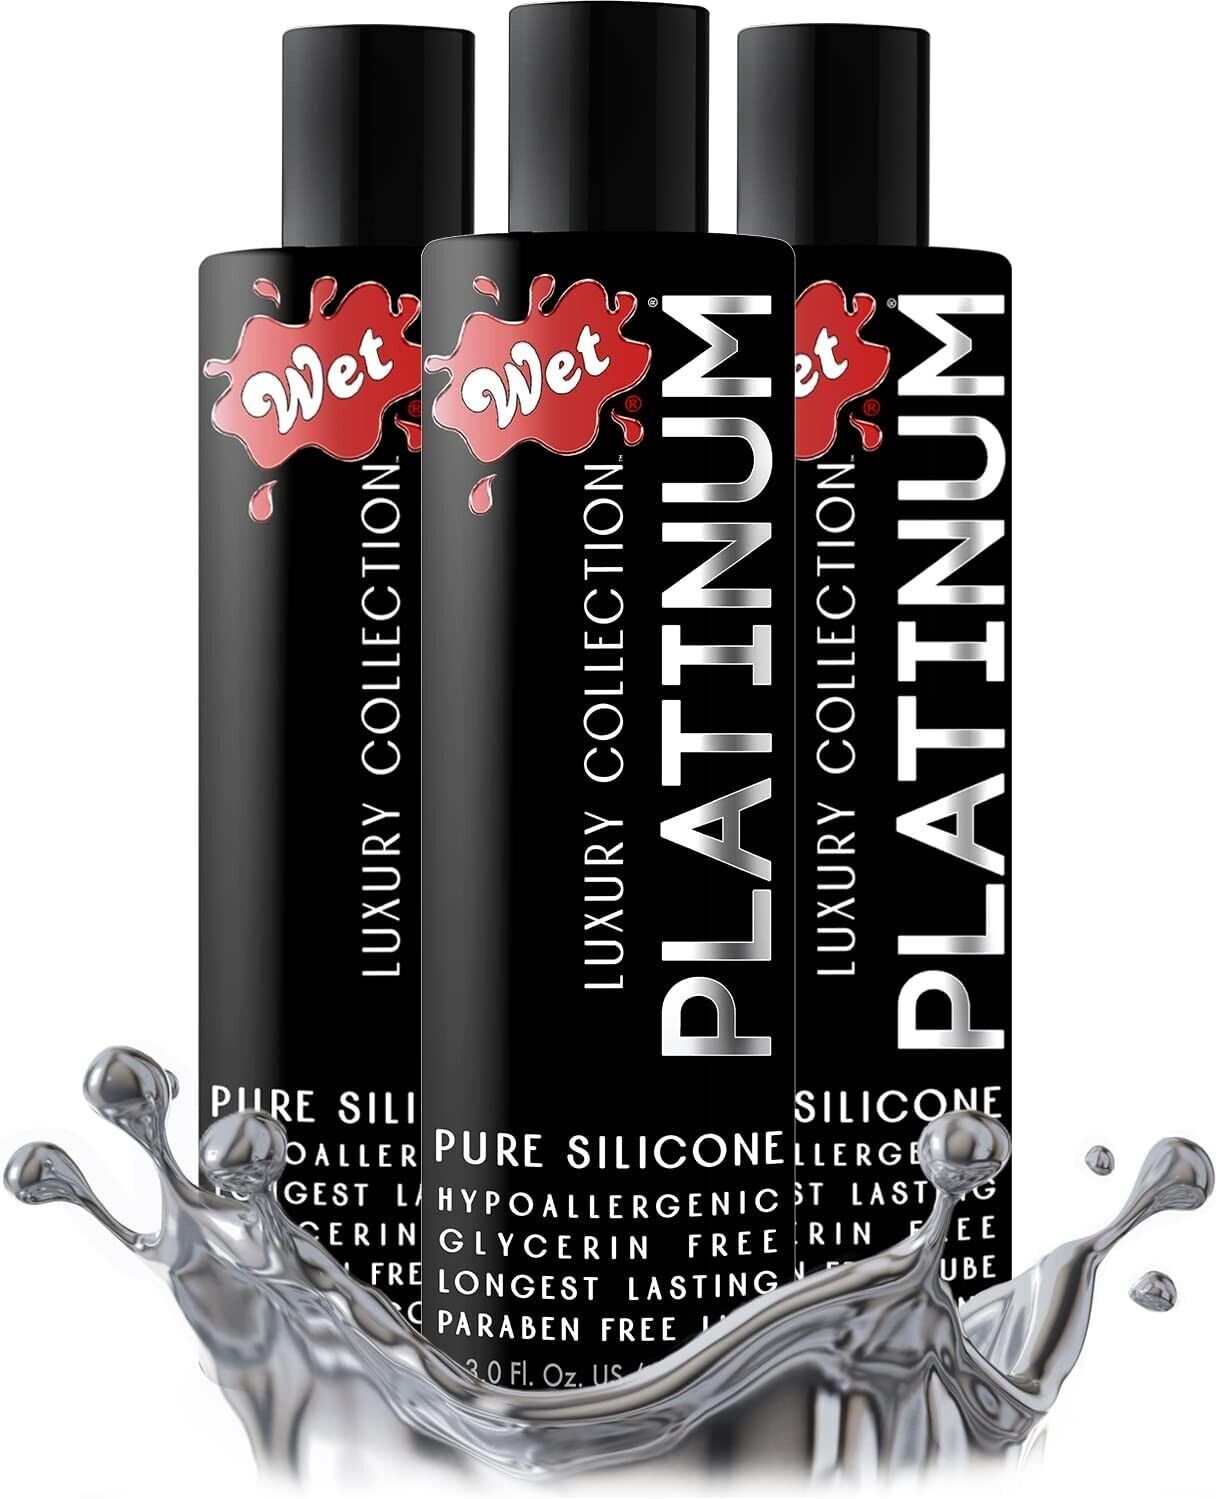 Wet Platinum Silicone Based Lube (3.0 fl oz 3-Pack), Personal Anal Lubricant